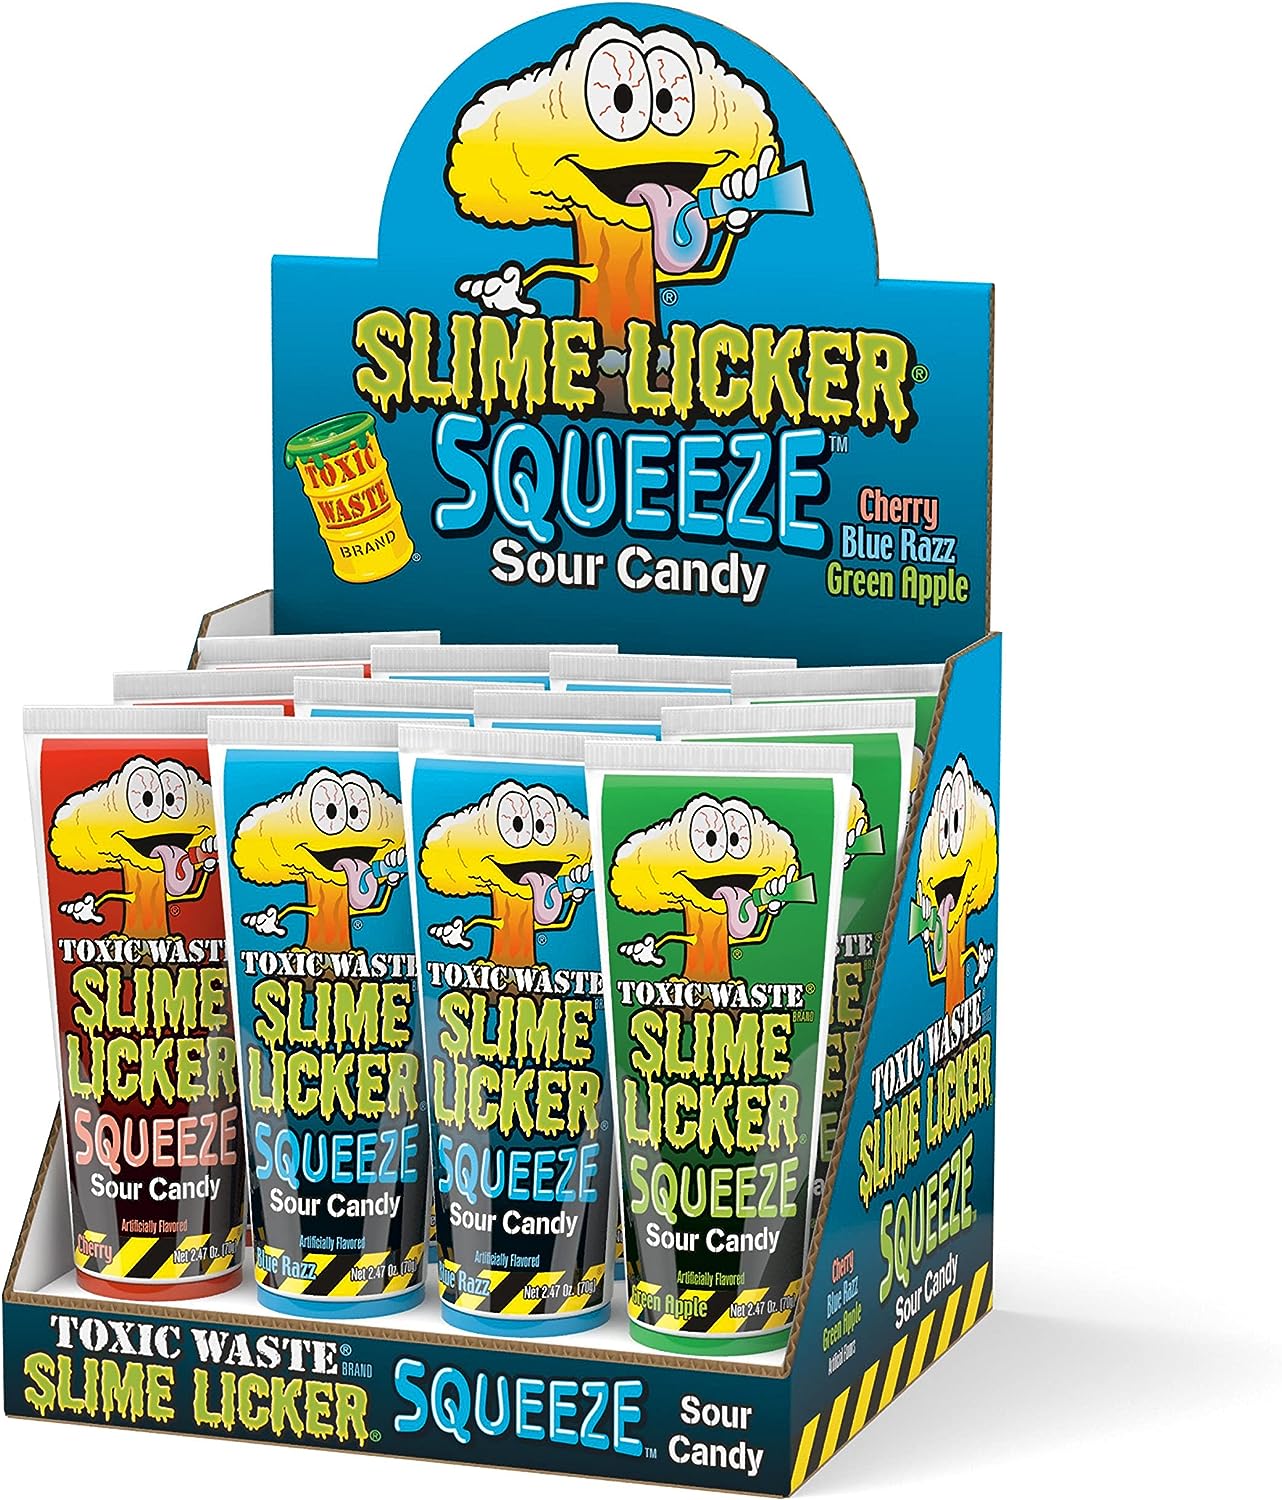 Toxic Waste Slime Licker Squeeze (2.4oz) (12ct)